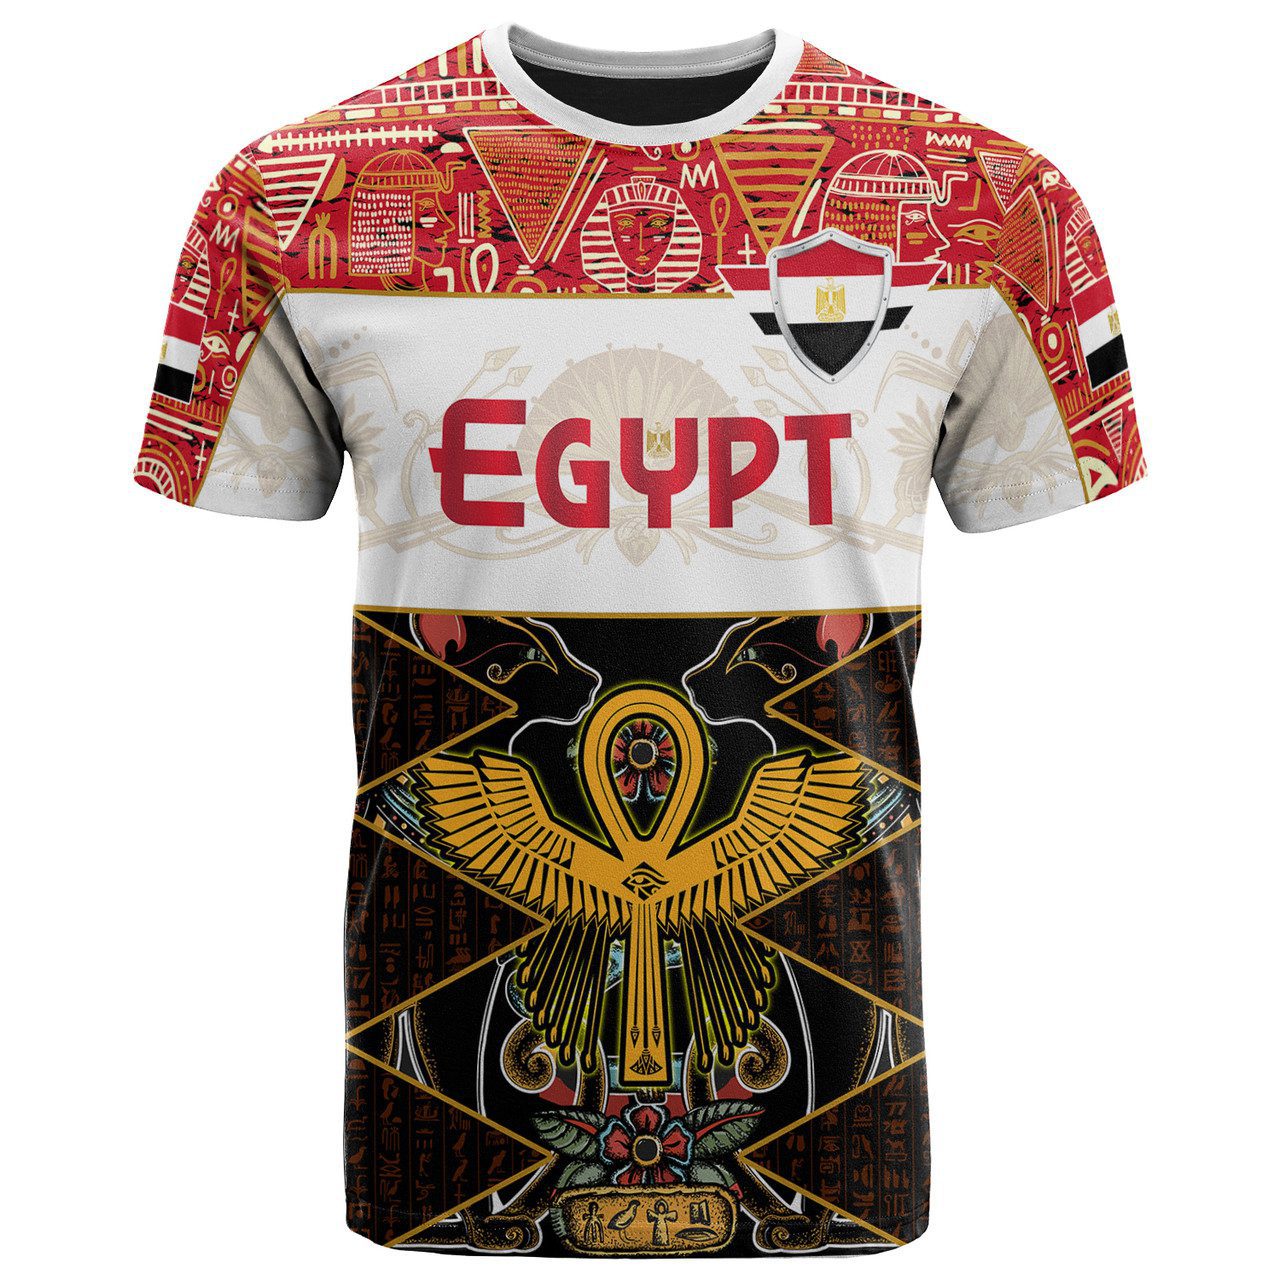 Egypt T-shirt – Egypt Revolution Day With Egyptian Ankh, Sacred Black Cat And Ancient Hieroglyphs T-shirt